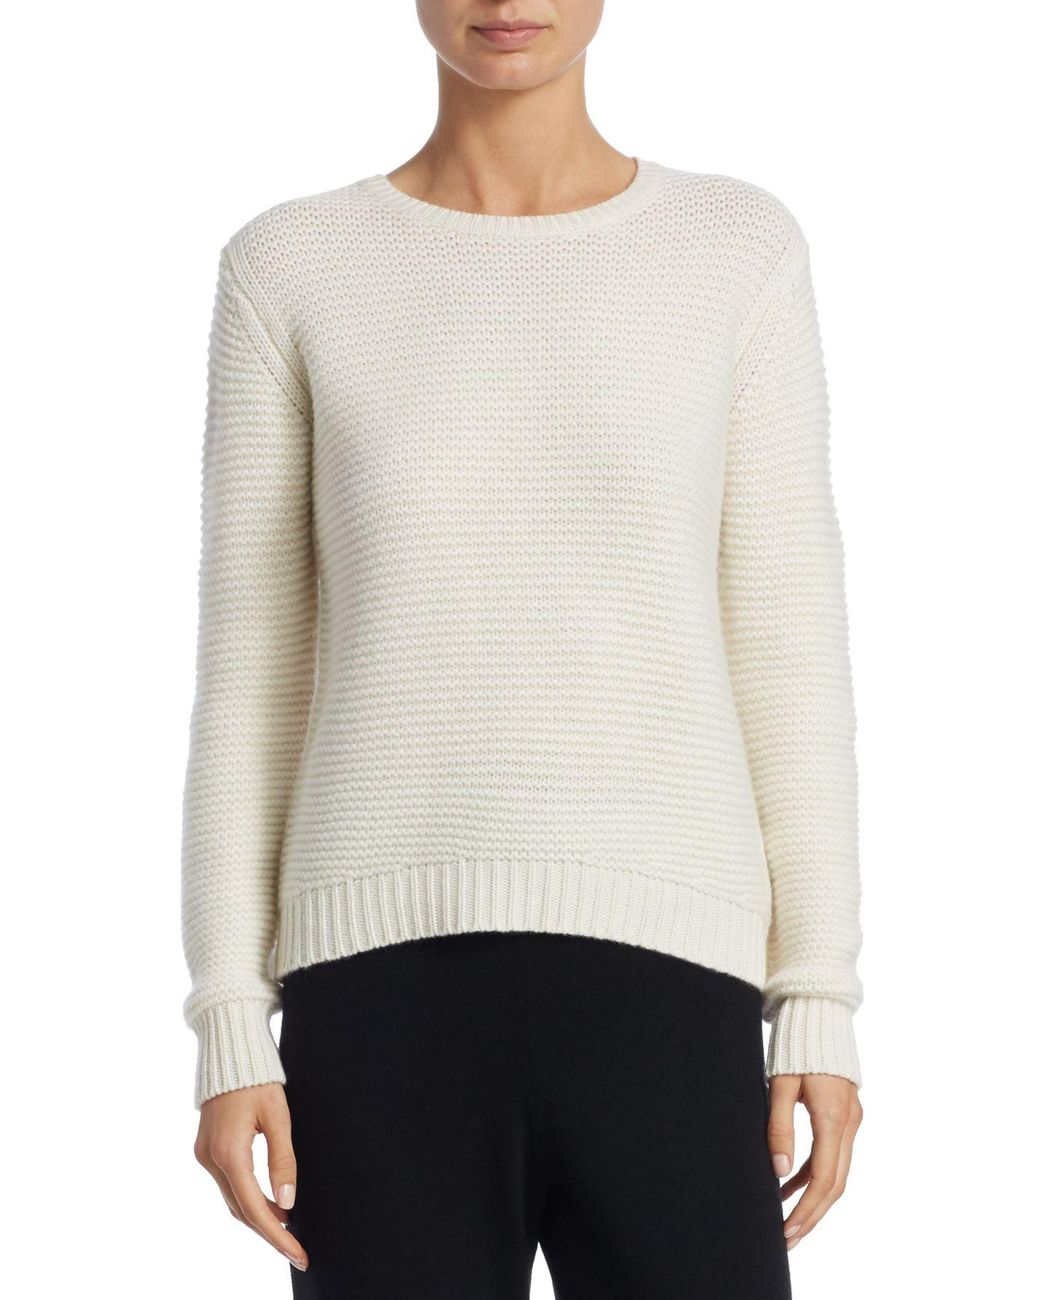 Saks Fifth Avenue Collection Textured Cashmere Sweater in Vintage White